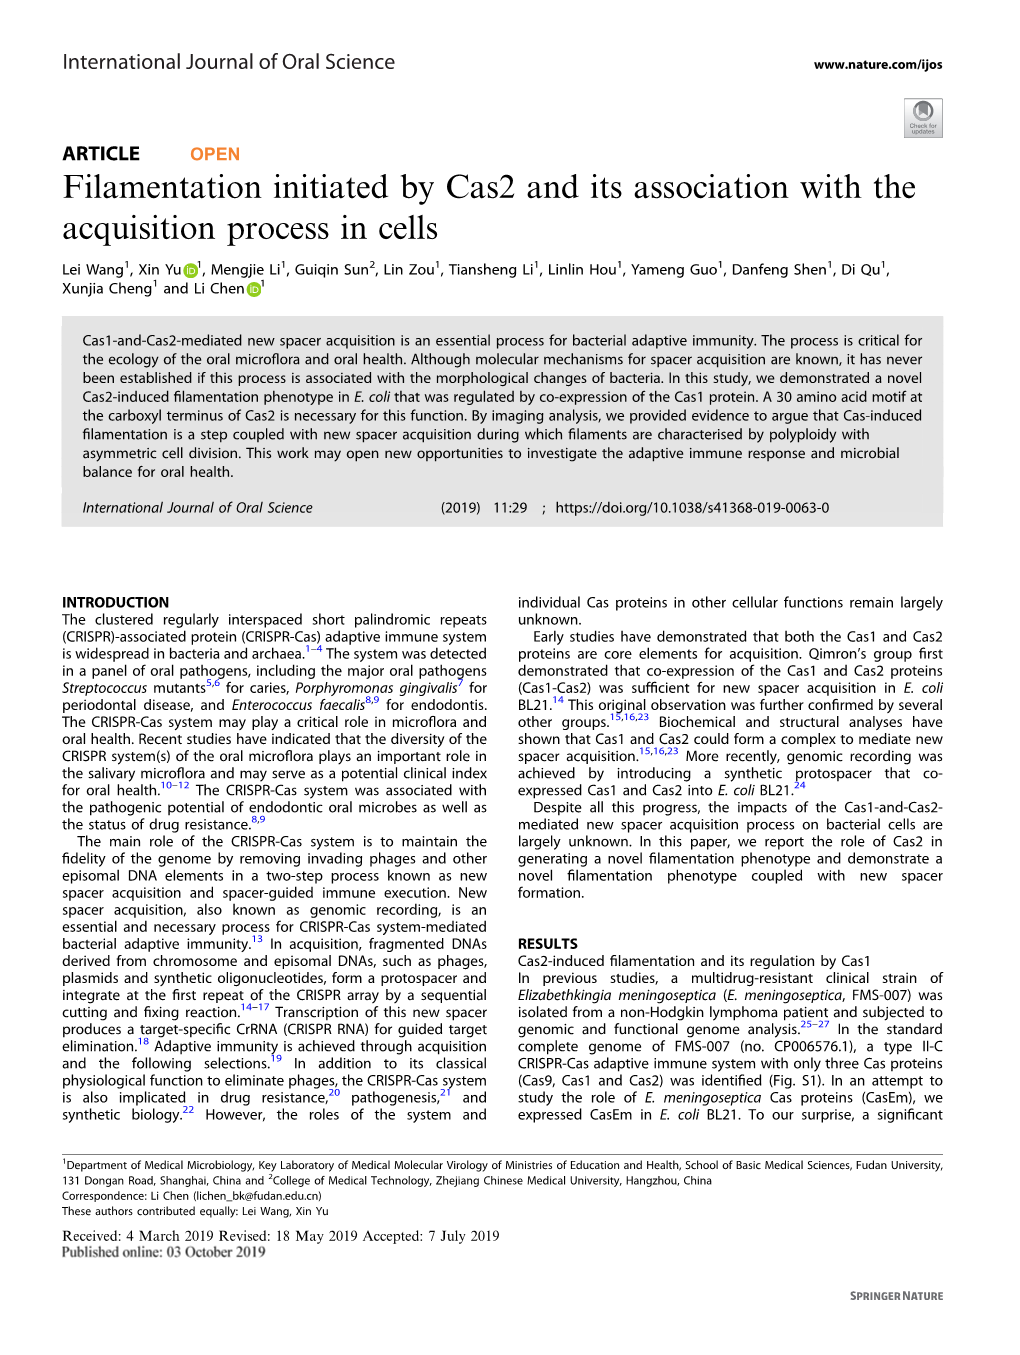 Filamentation Initiated by Cas2 and Its Association with the Acquisition Process in Cells